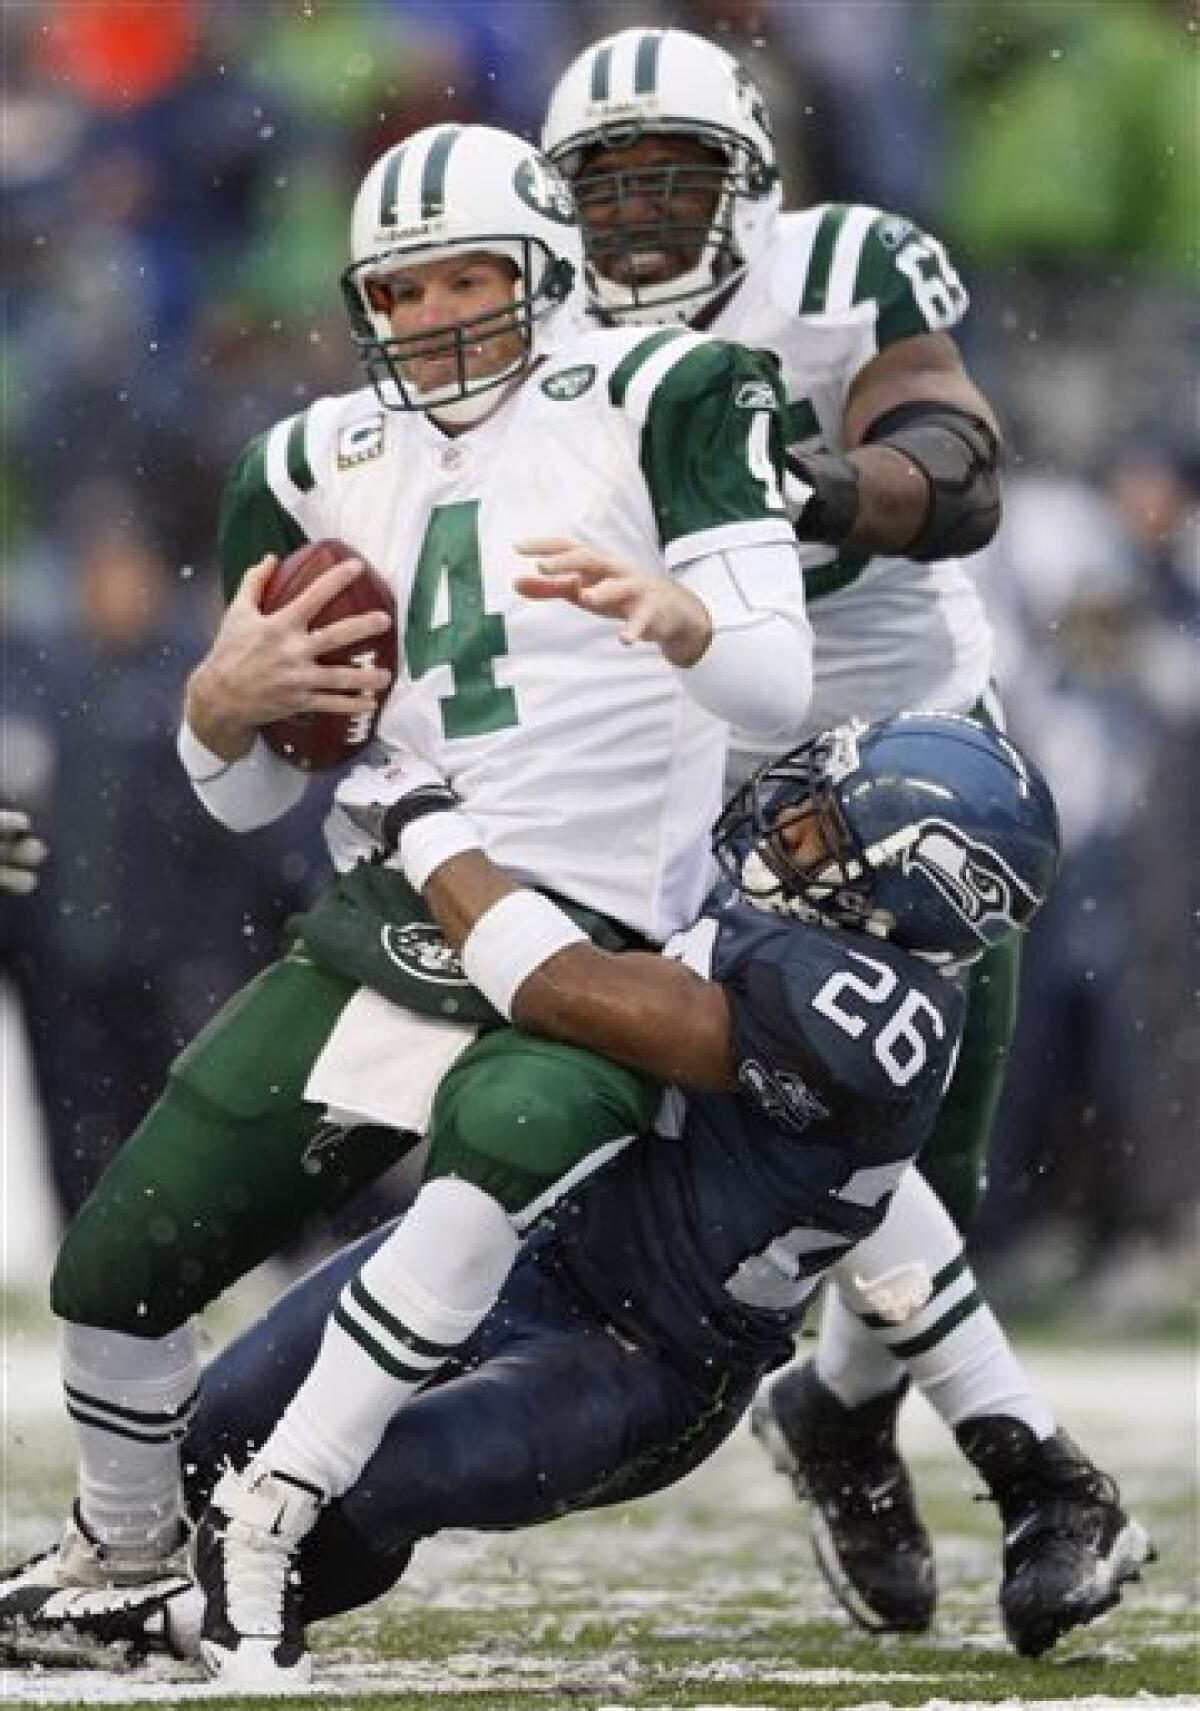 FILE - In this Dec. 21, 2008, file photo, New York Jets quarterback Brett Favre is sacked by Seattle Seahawks cornerback Josh Wilson (26) as Jets' Brandon Moore looks on from rear during an NFL football game in Seattle. Favre was released from the reserve-retired list by the Jets on Tuesday night, April 28, 2009, making the quarterback a free agent if he decides to again come out of retirement. (AP Photo/John Froschauer, File)